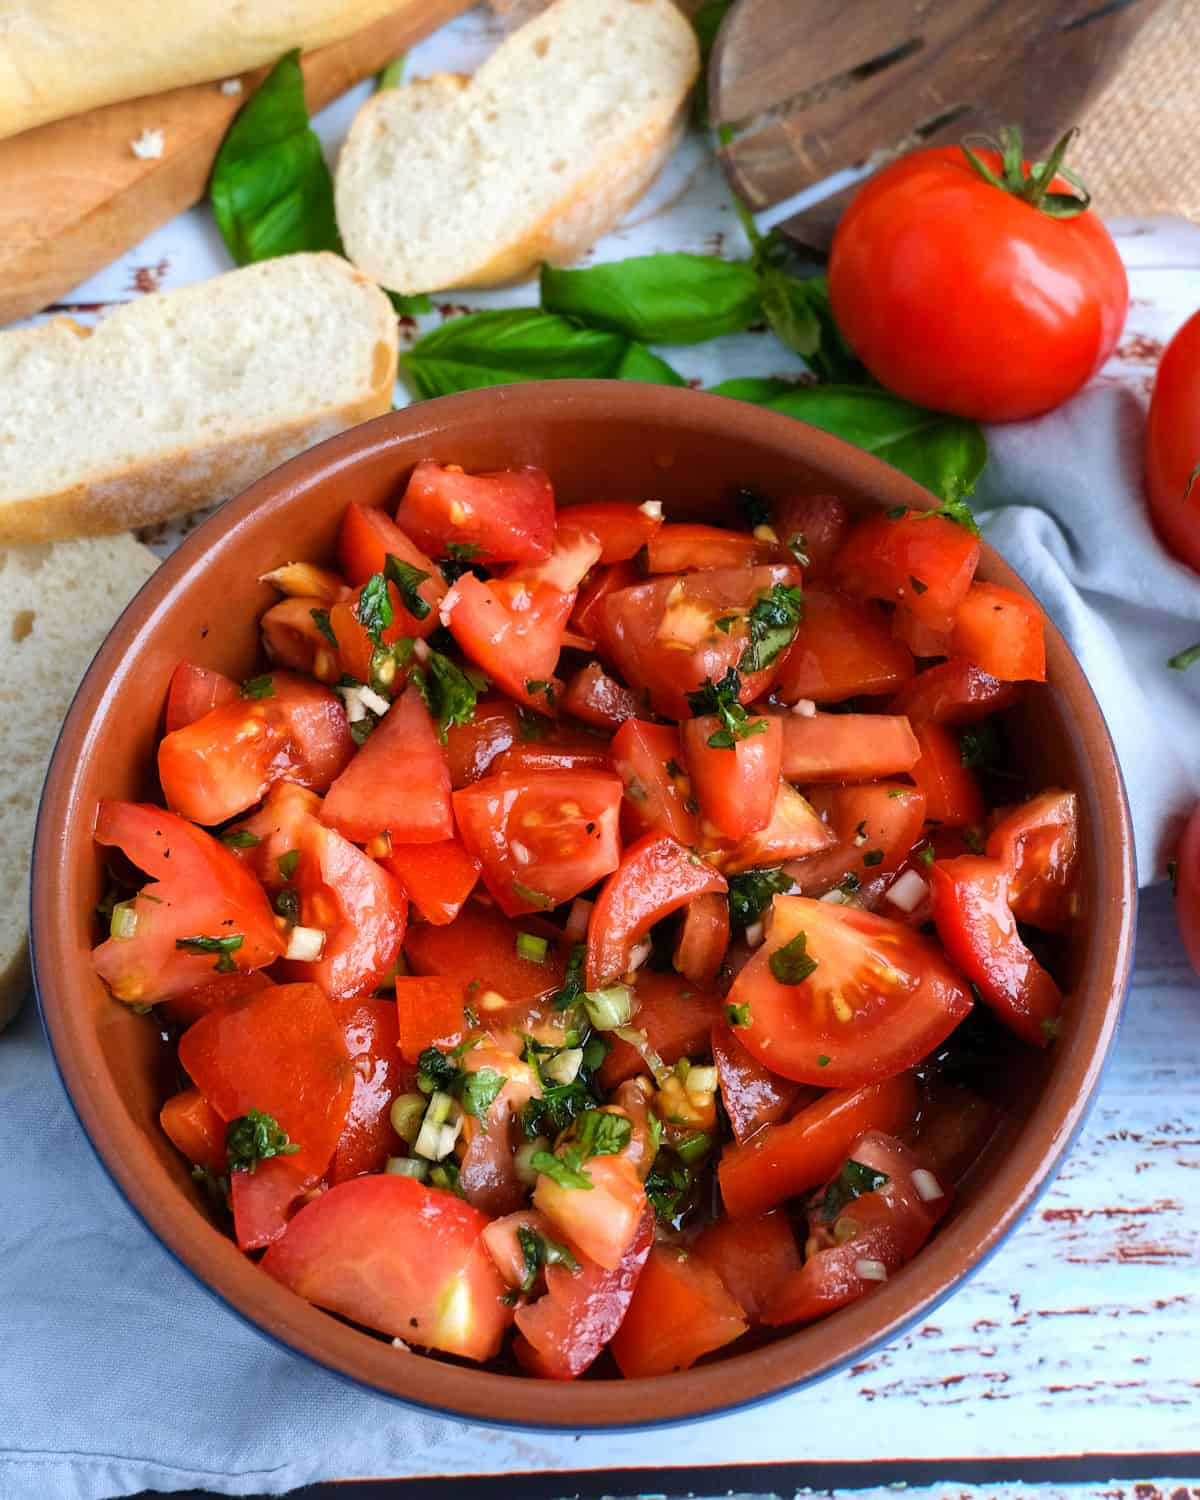 German tomato salad in a bowl.